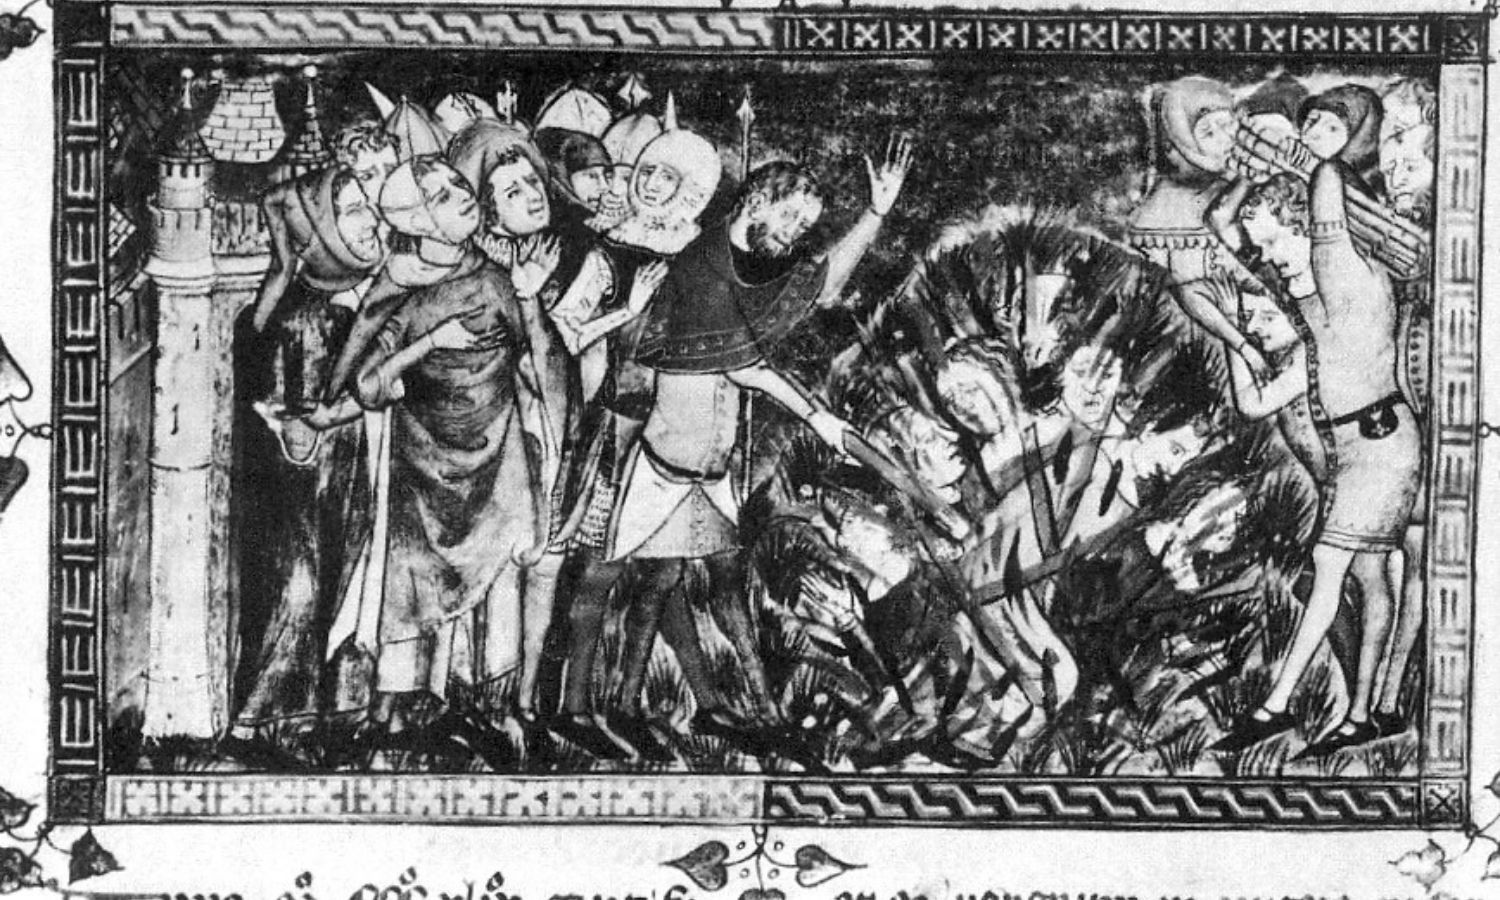 OTD in 1349: Between 100 and 3000 Jews were killed in riots in The Erfurt Massacre in the town of Erfurt